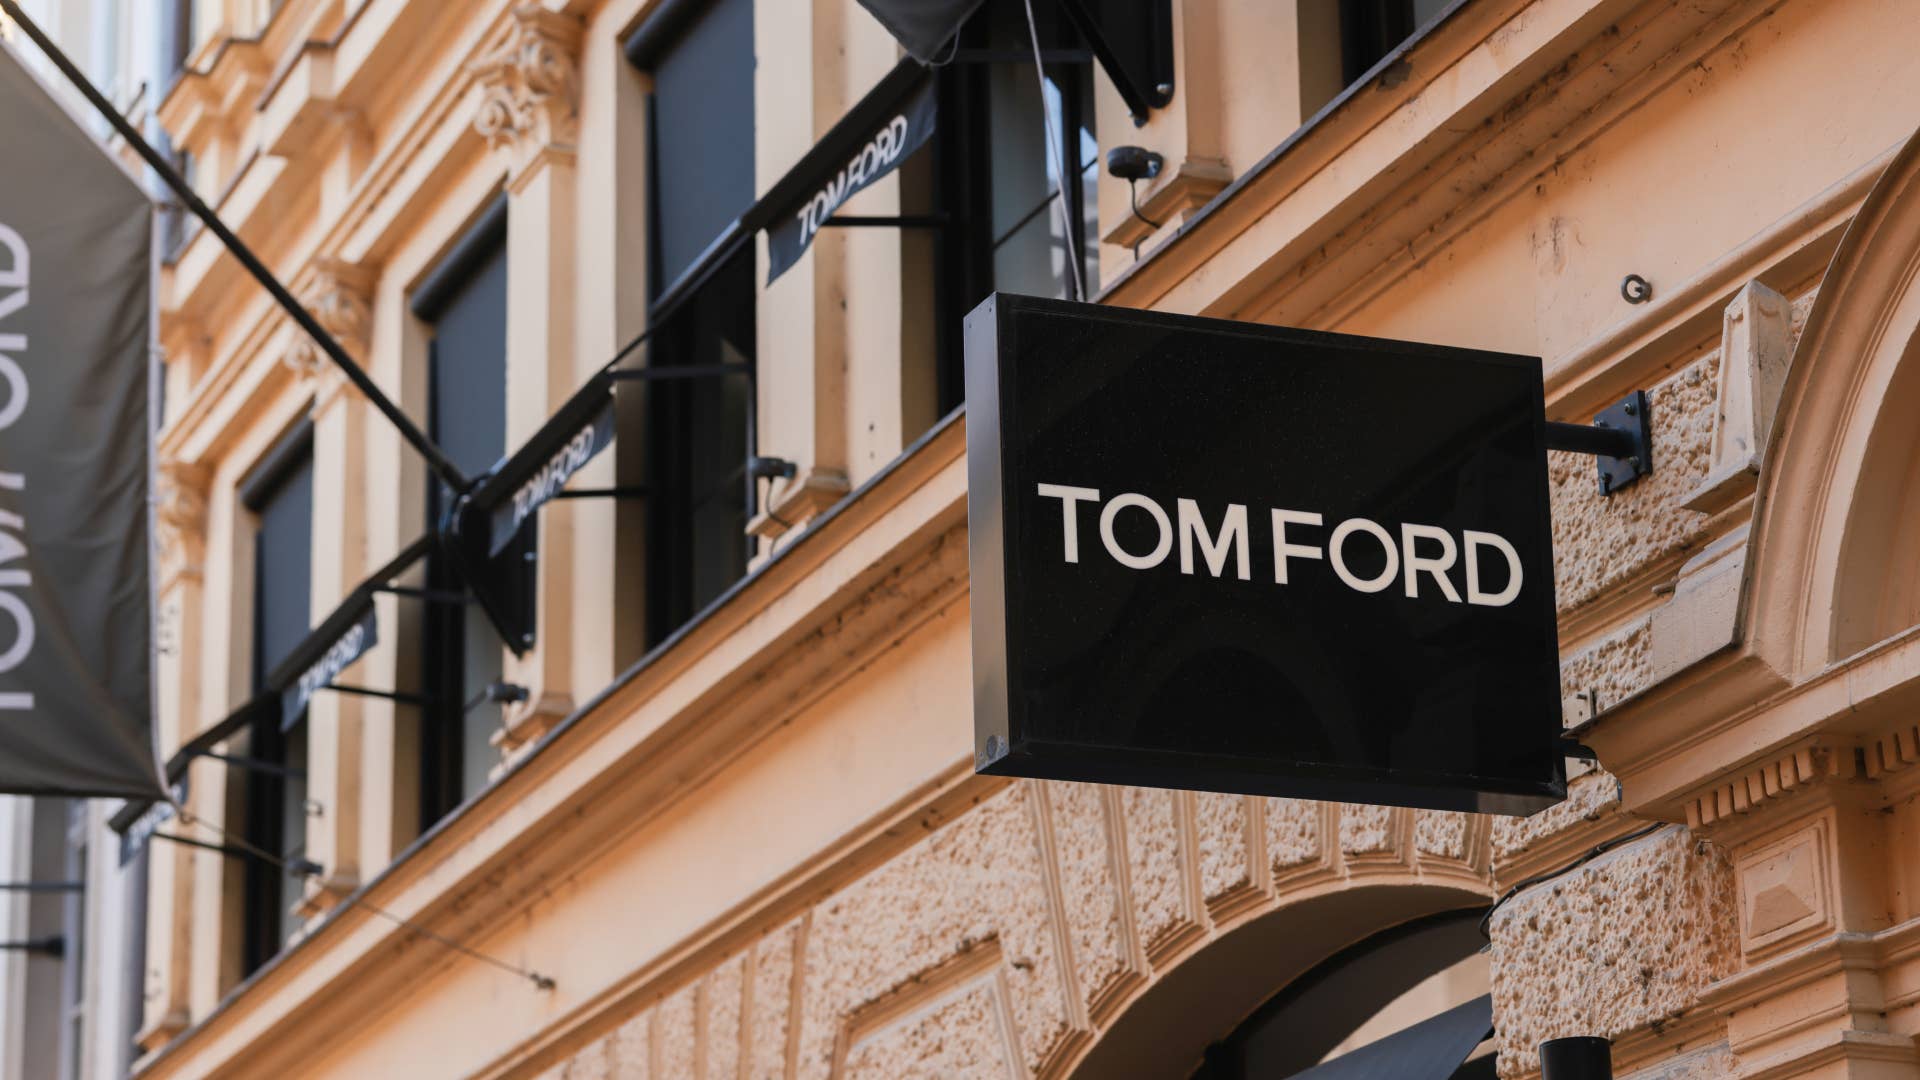 A logo for Tom Ford brand is pictured